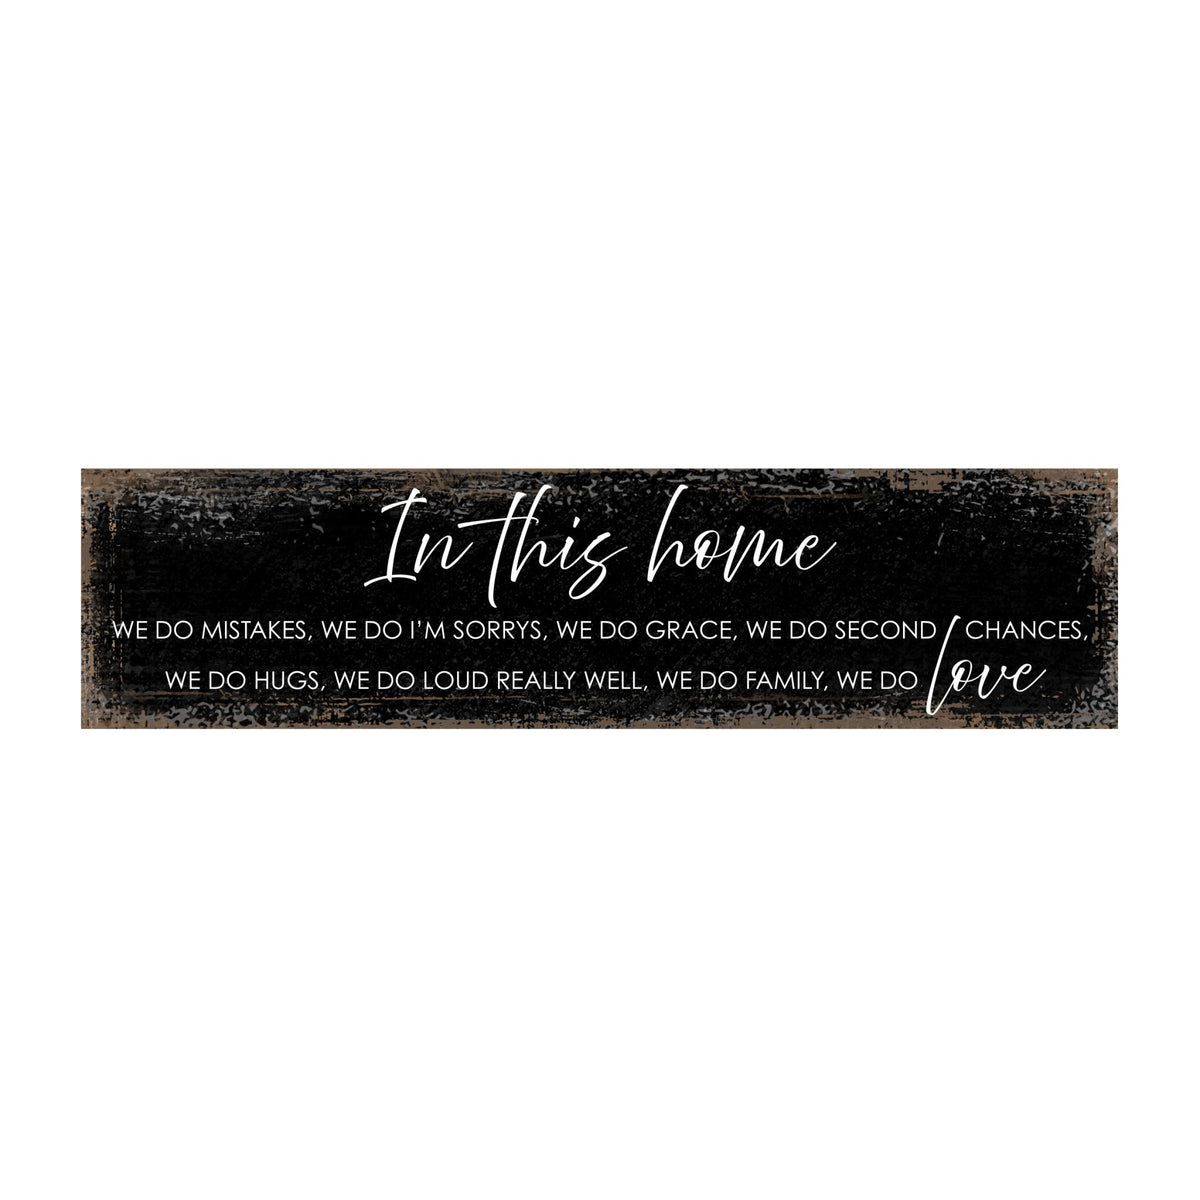 Modern Inspirational Wooden Wall Art Hanging Plaque 10x40 – In This Home – for Family and Home Decoration - LifeSong Milestones